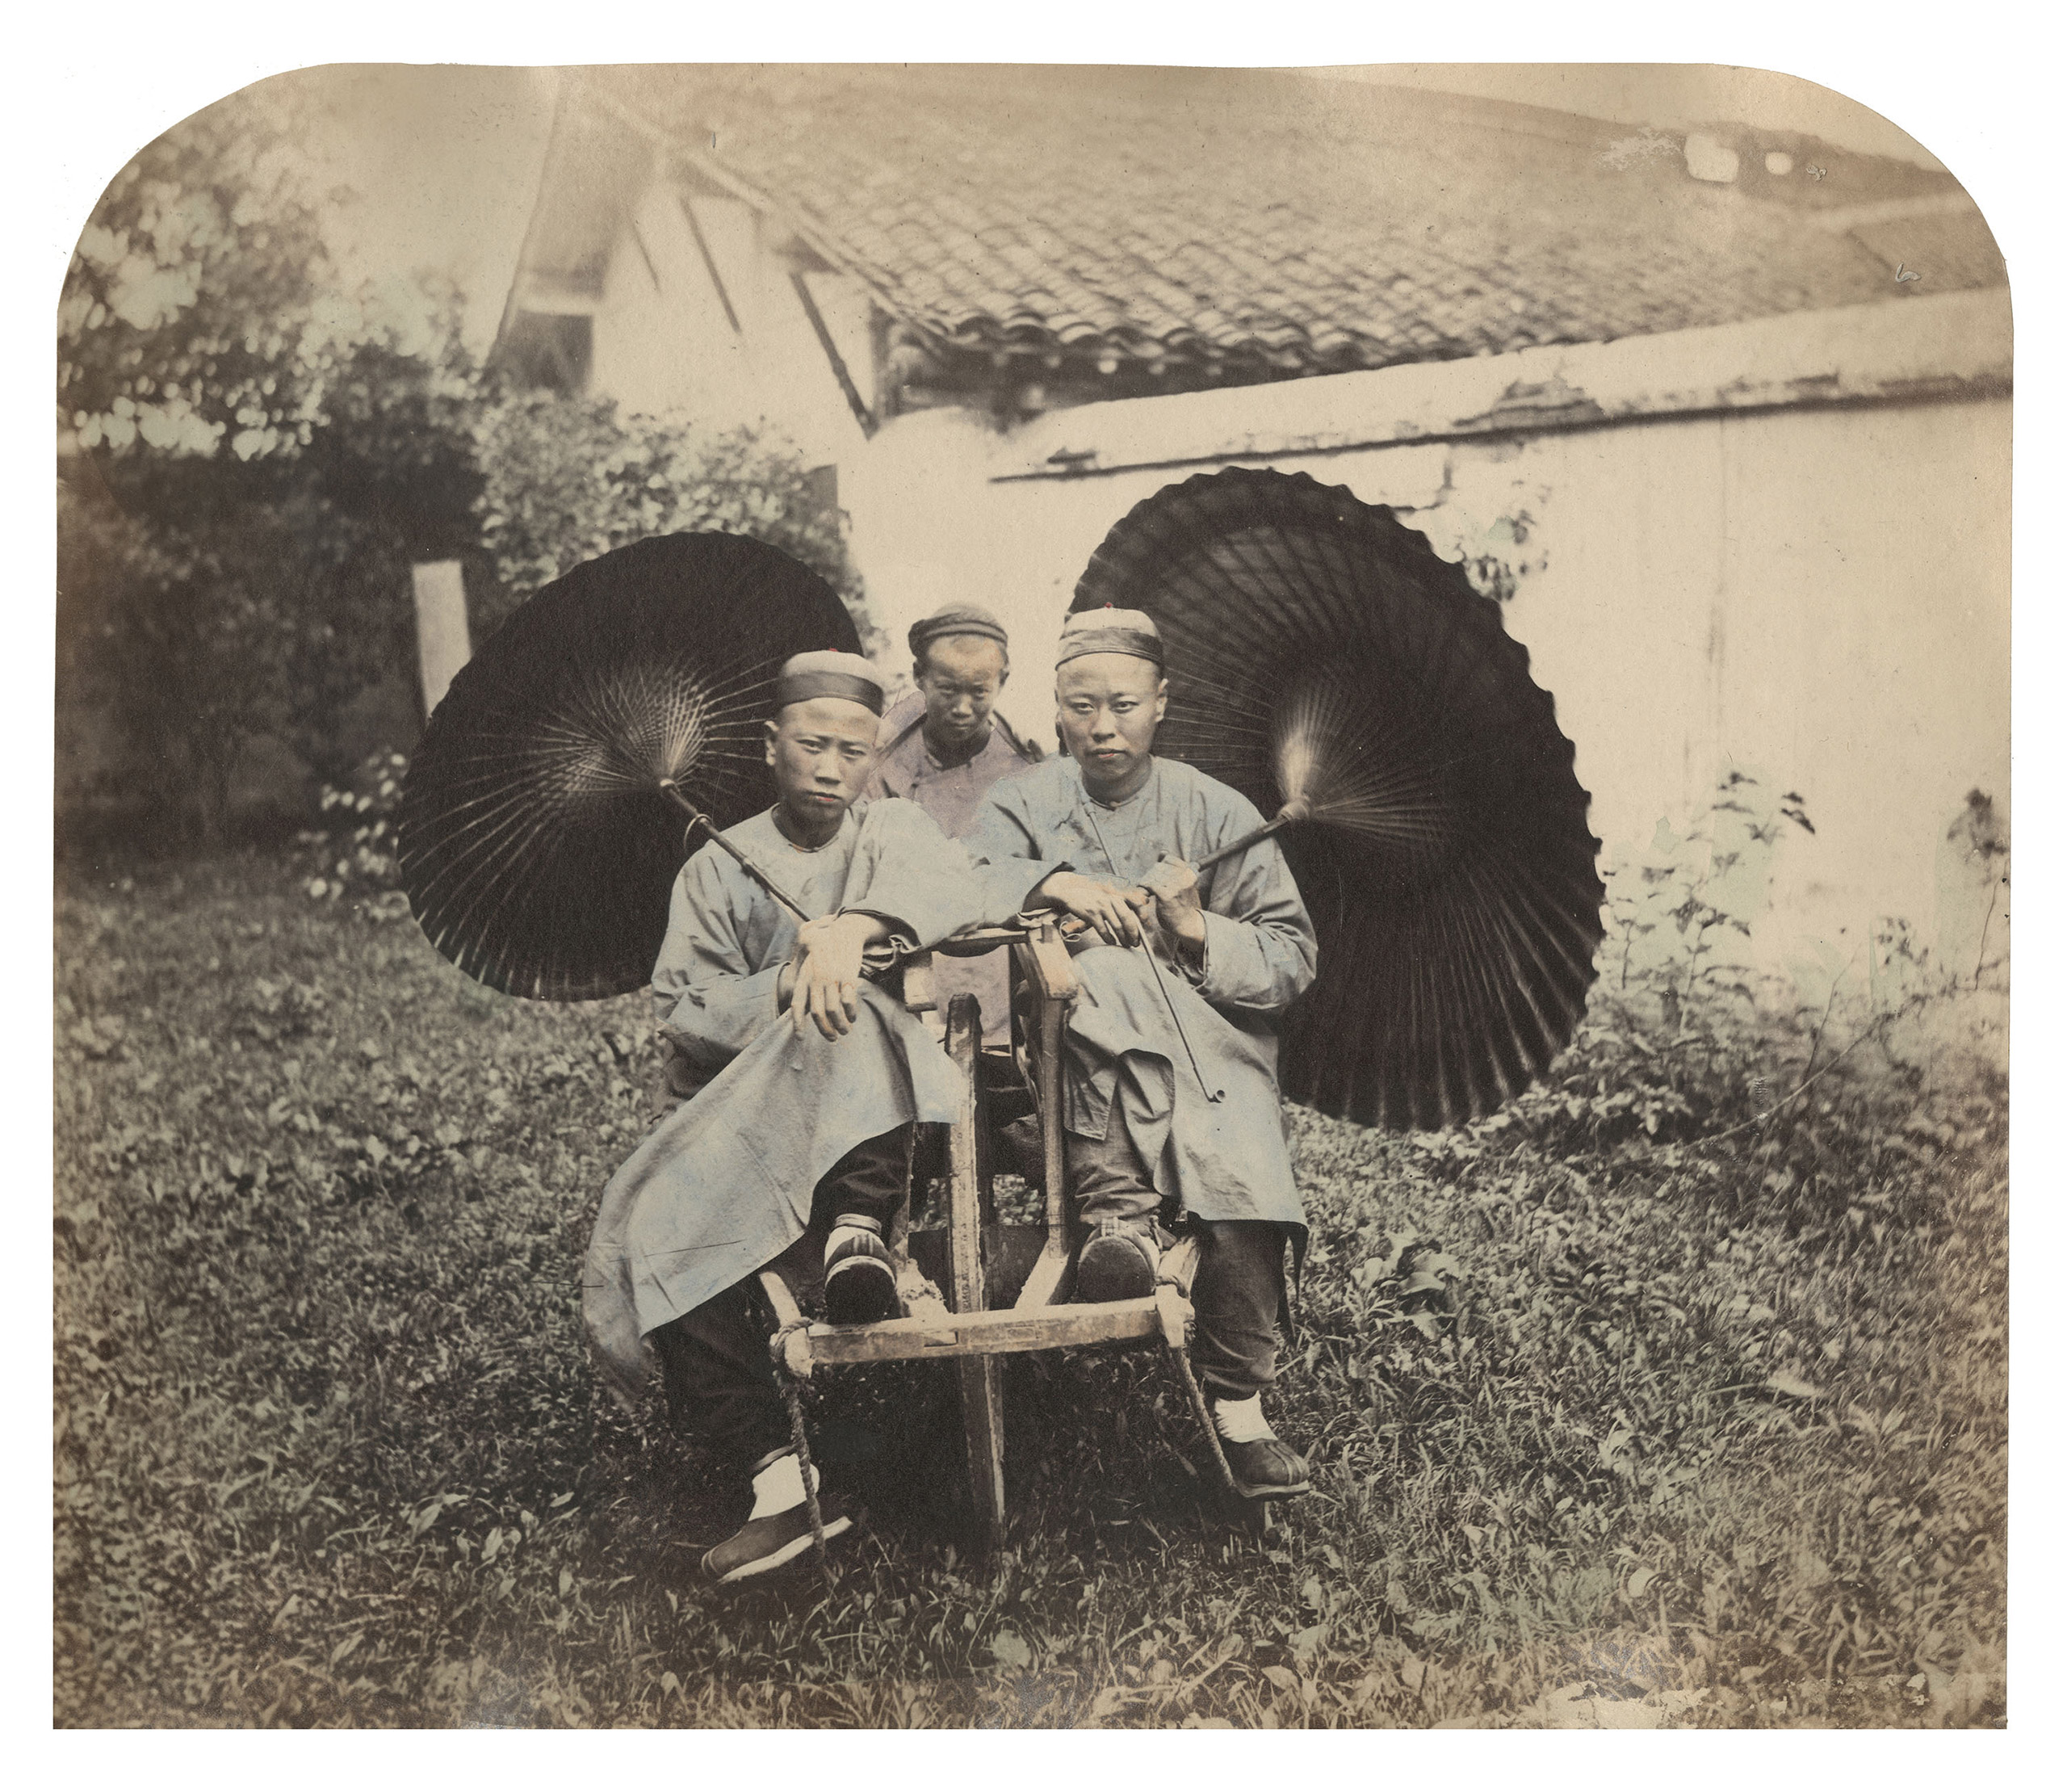 Caption from Stephan Lowentheil Collection. William Saunders was fascinated by traditional Chinese technologies that he believed predated similar inventions in the West. In this photograph, two men pose on a man-powered vehicle – a wheelbarrow typical of late Qing Shanghai. The driver stands at the rear. Their assertive gazes suggest a confidence before the camera that was unusual in late Qing Dynasty photographs.